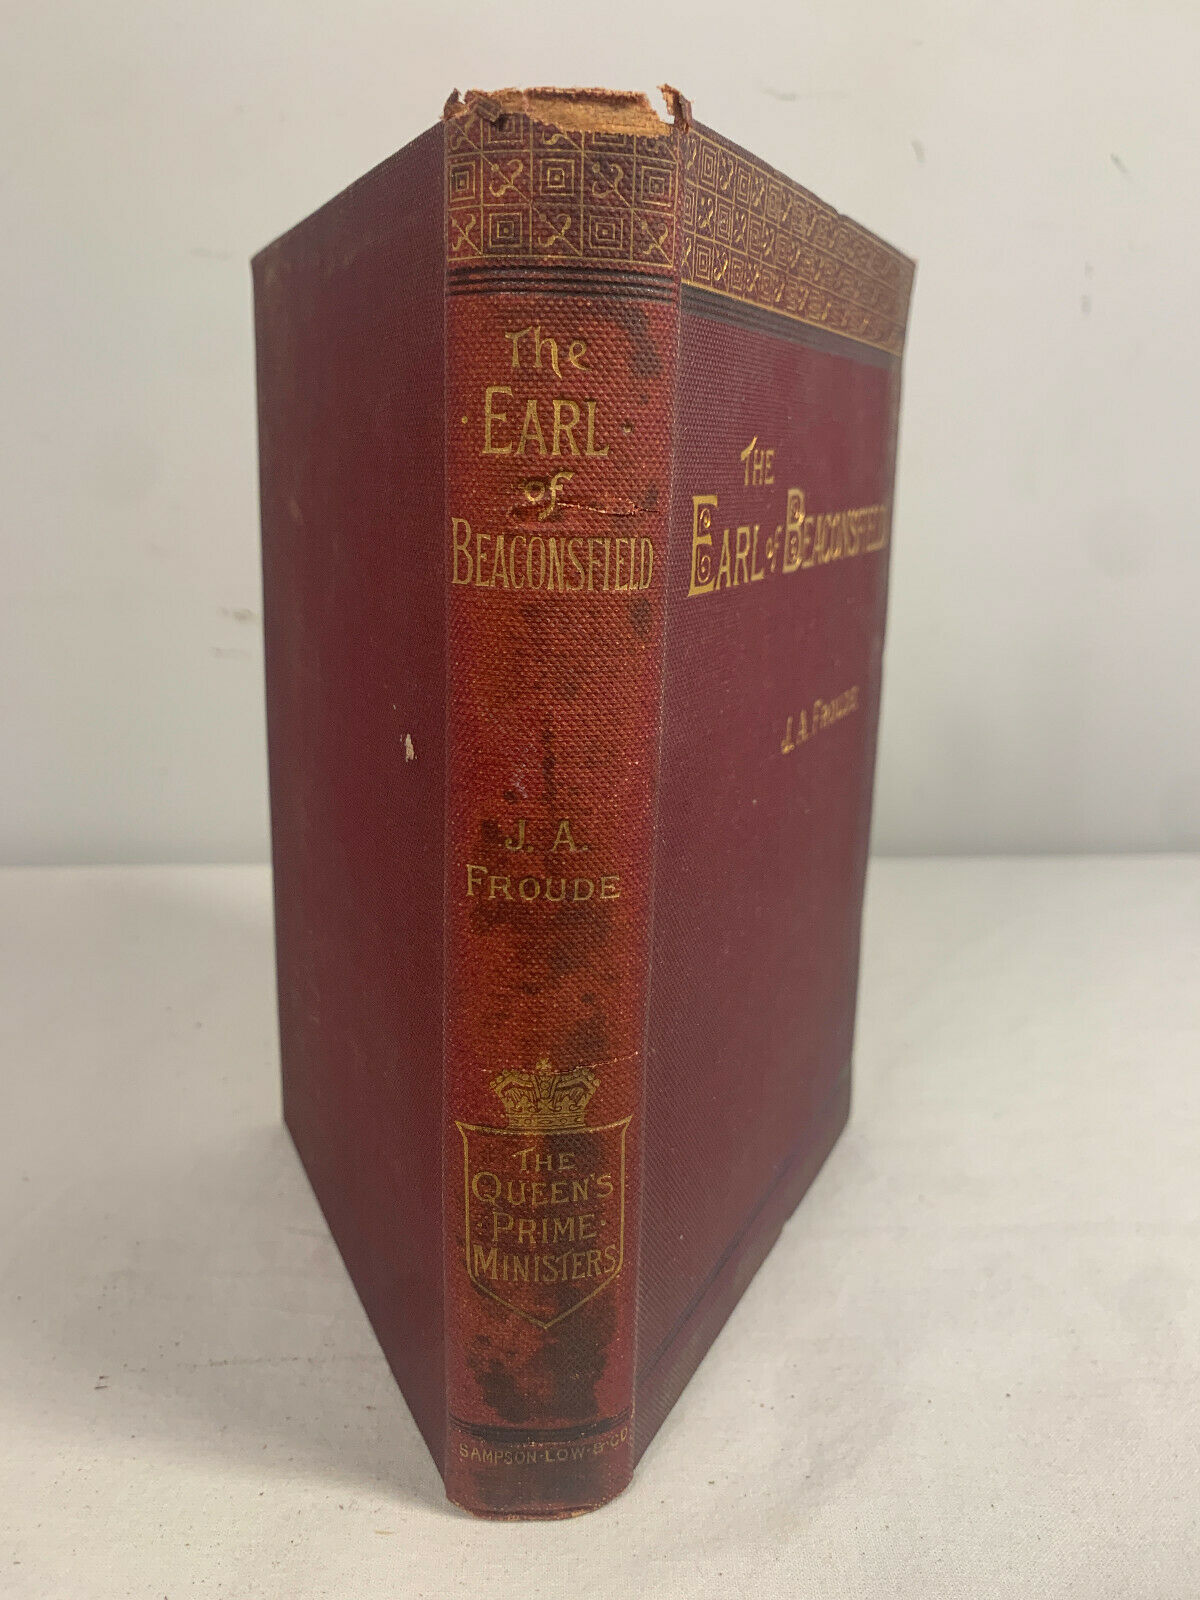 The Earl of Beaconsfield J.A. Froude, Hardcover 1891 5th edition